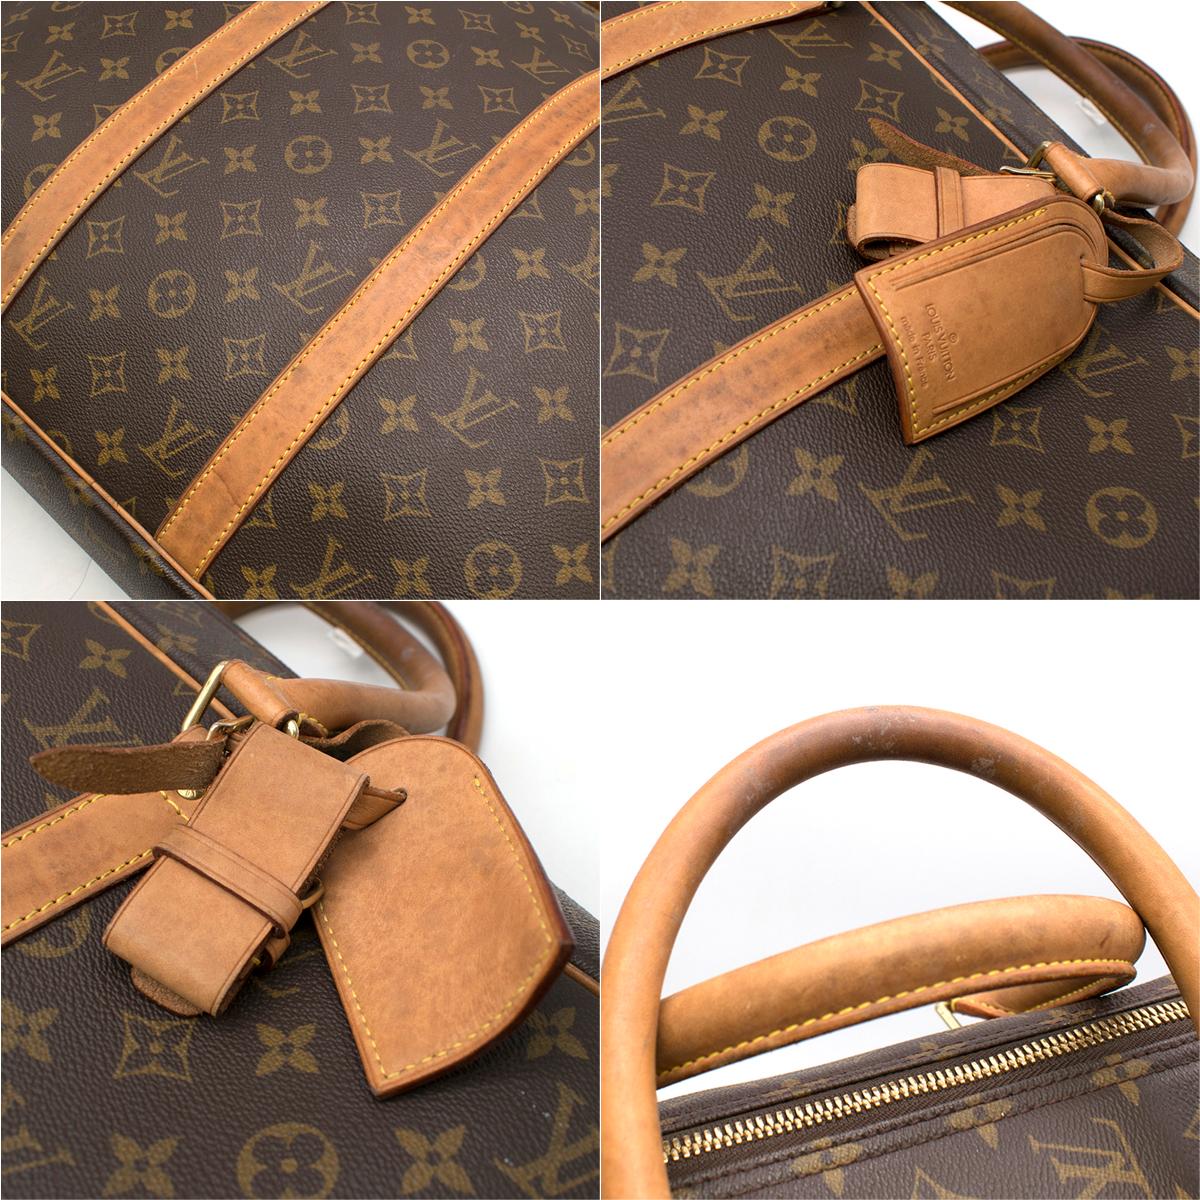 Women's or Men's Louis Vuitton Sirius 55 Soft sided Luggage One size